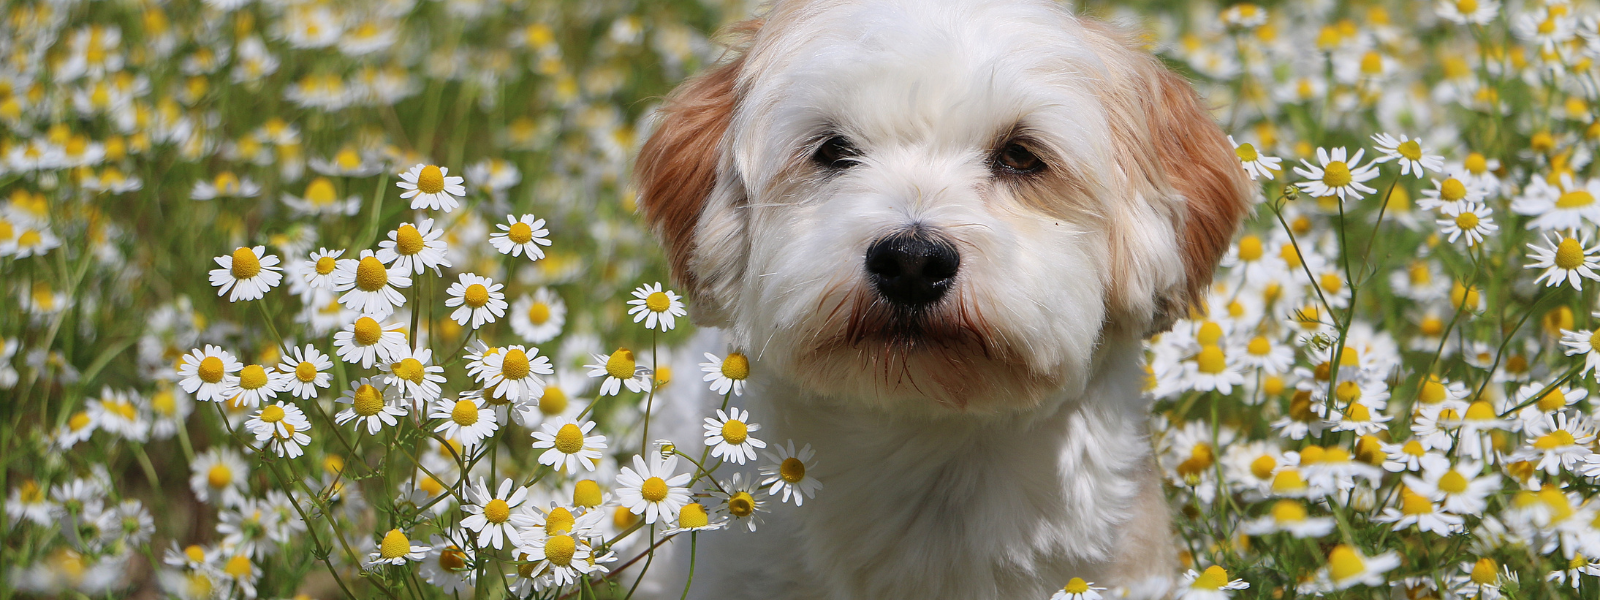 Environmental allergy in dogs